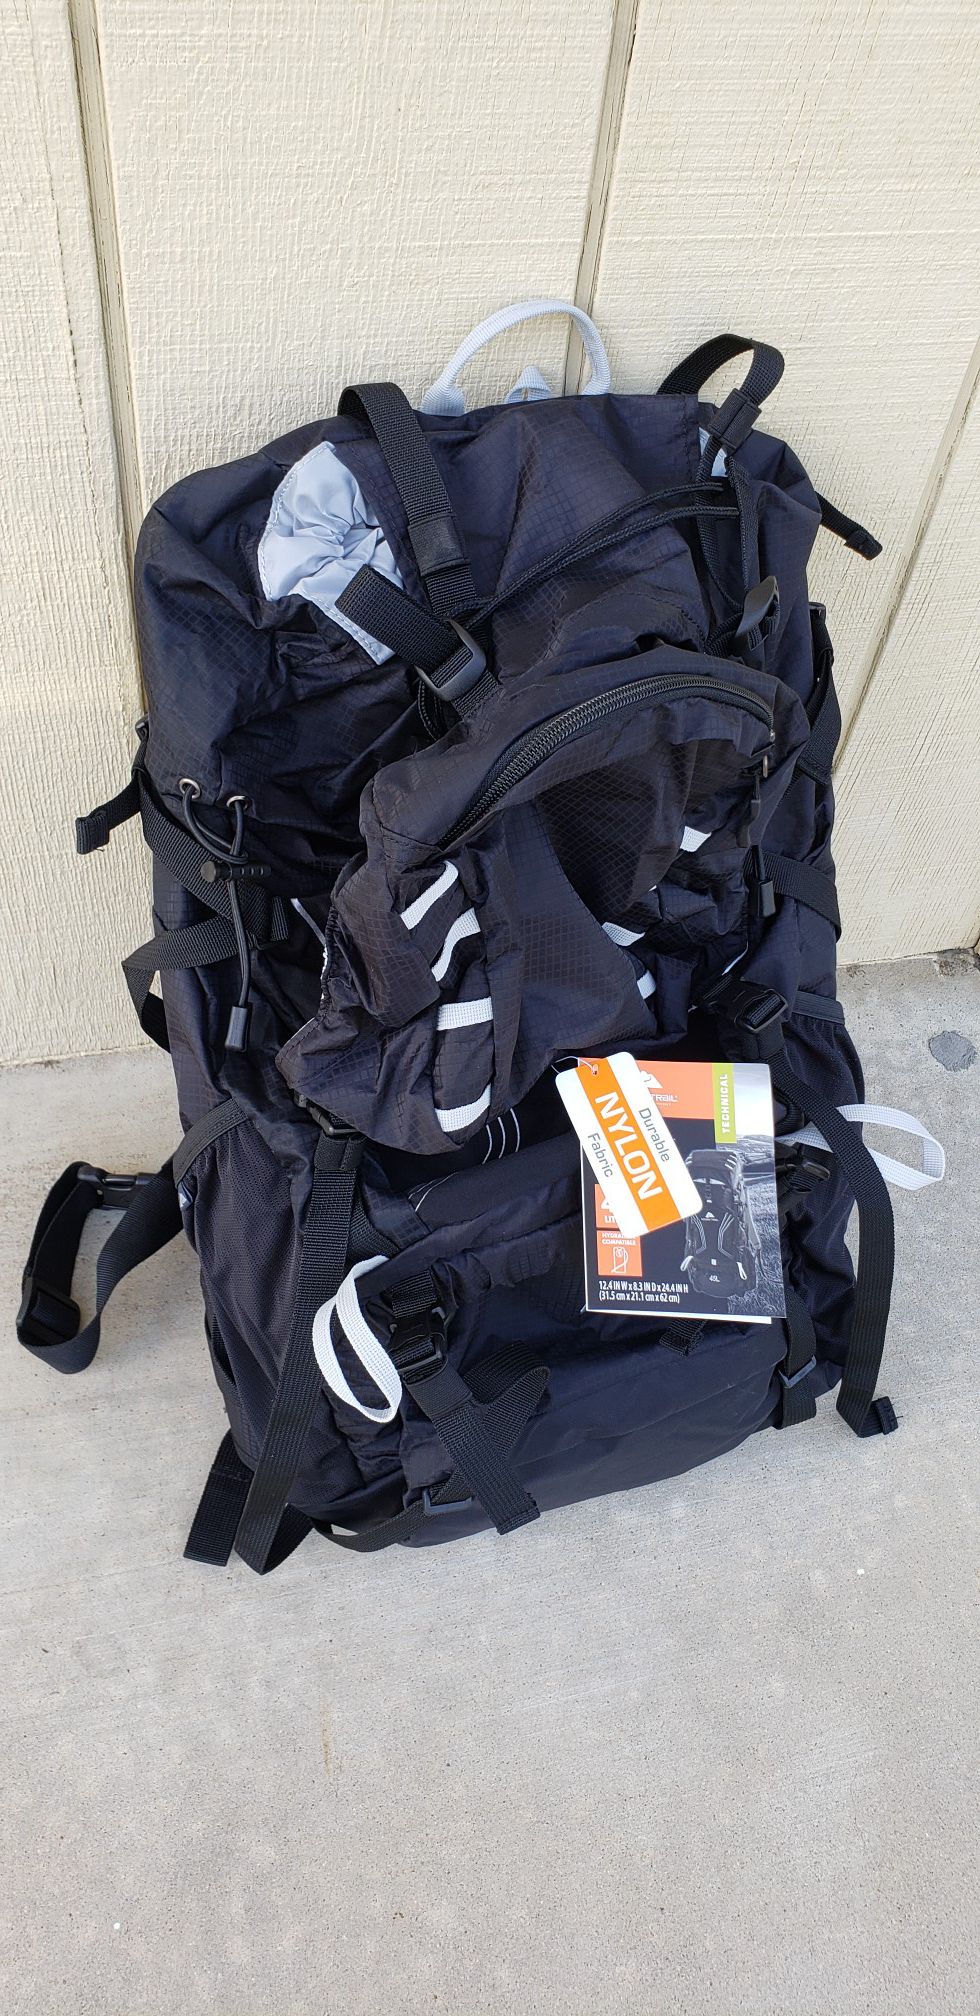 HIKING CAMPING BACKPACK BRAND NEW